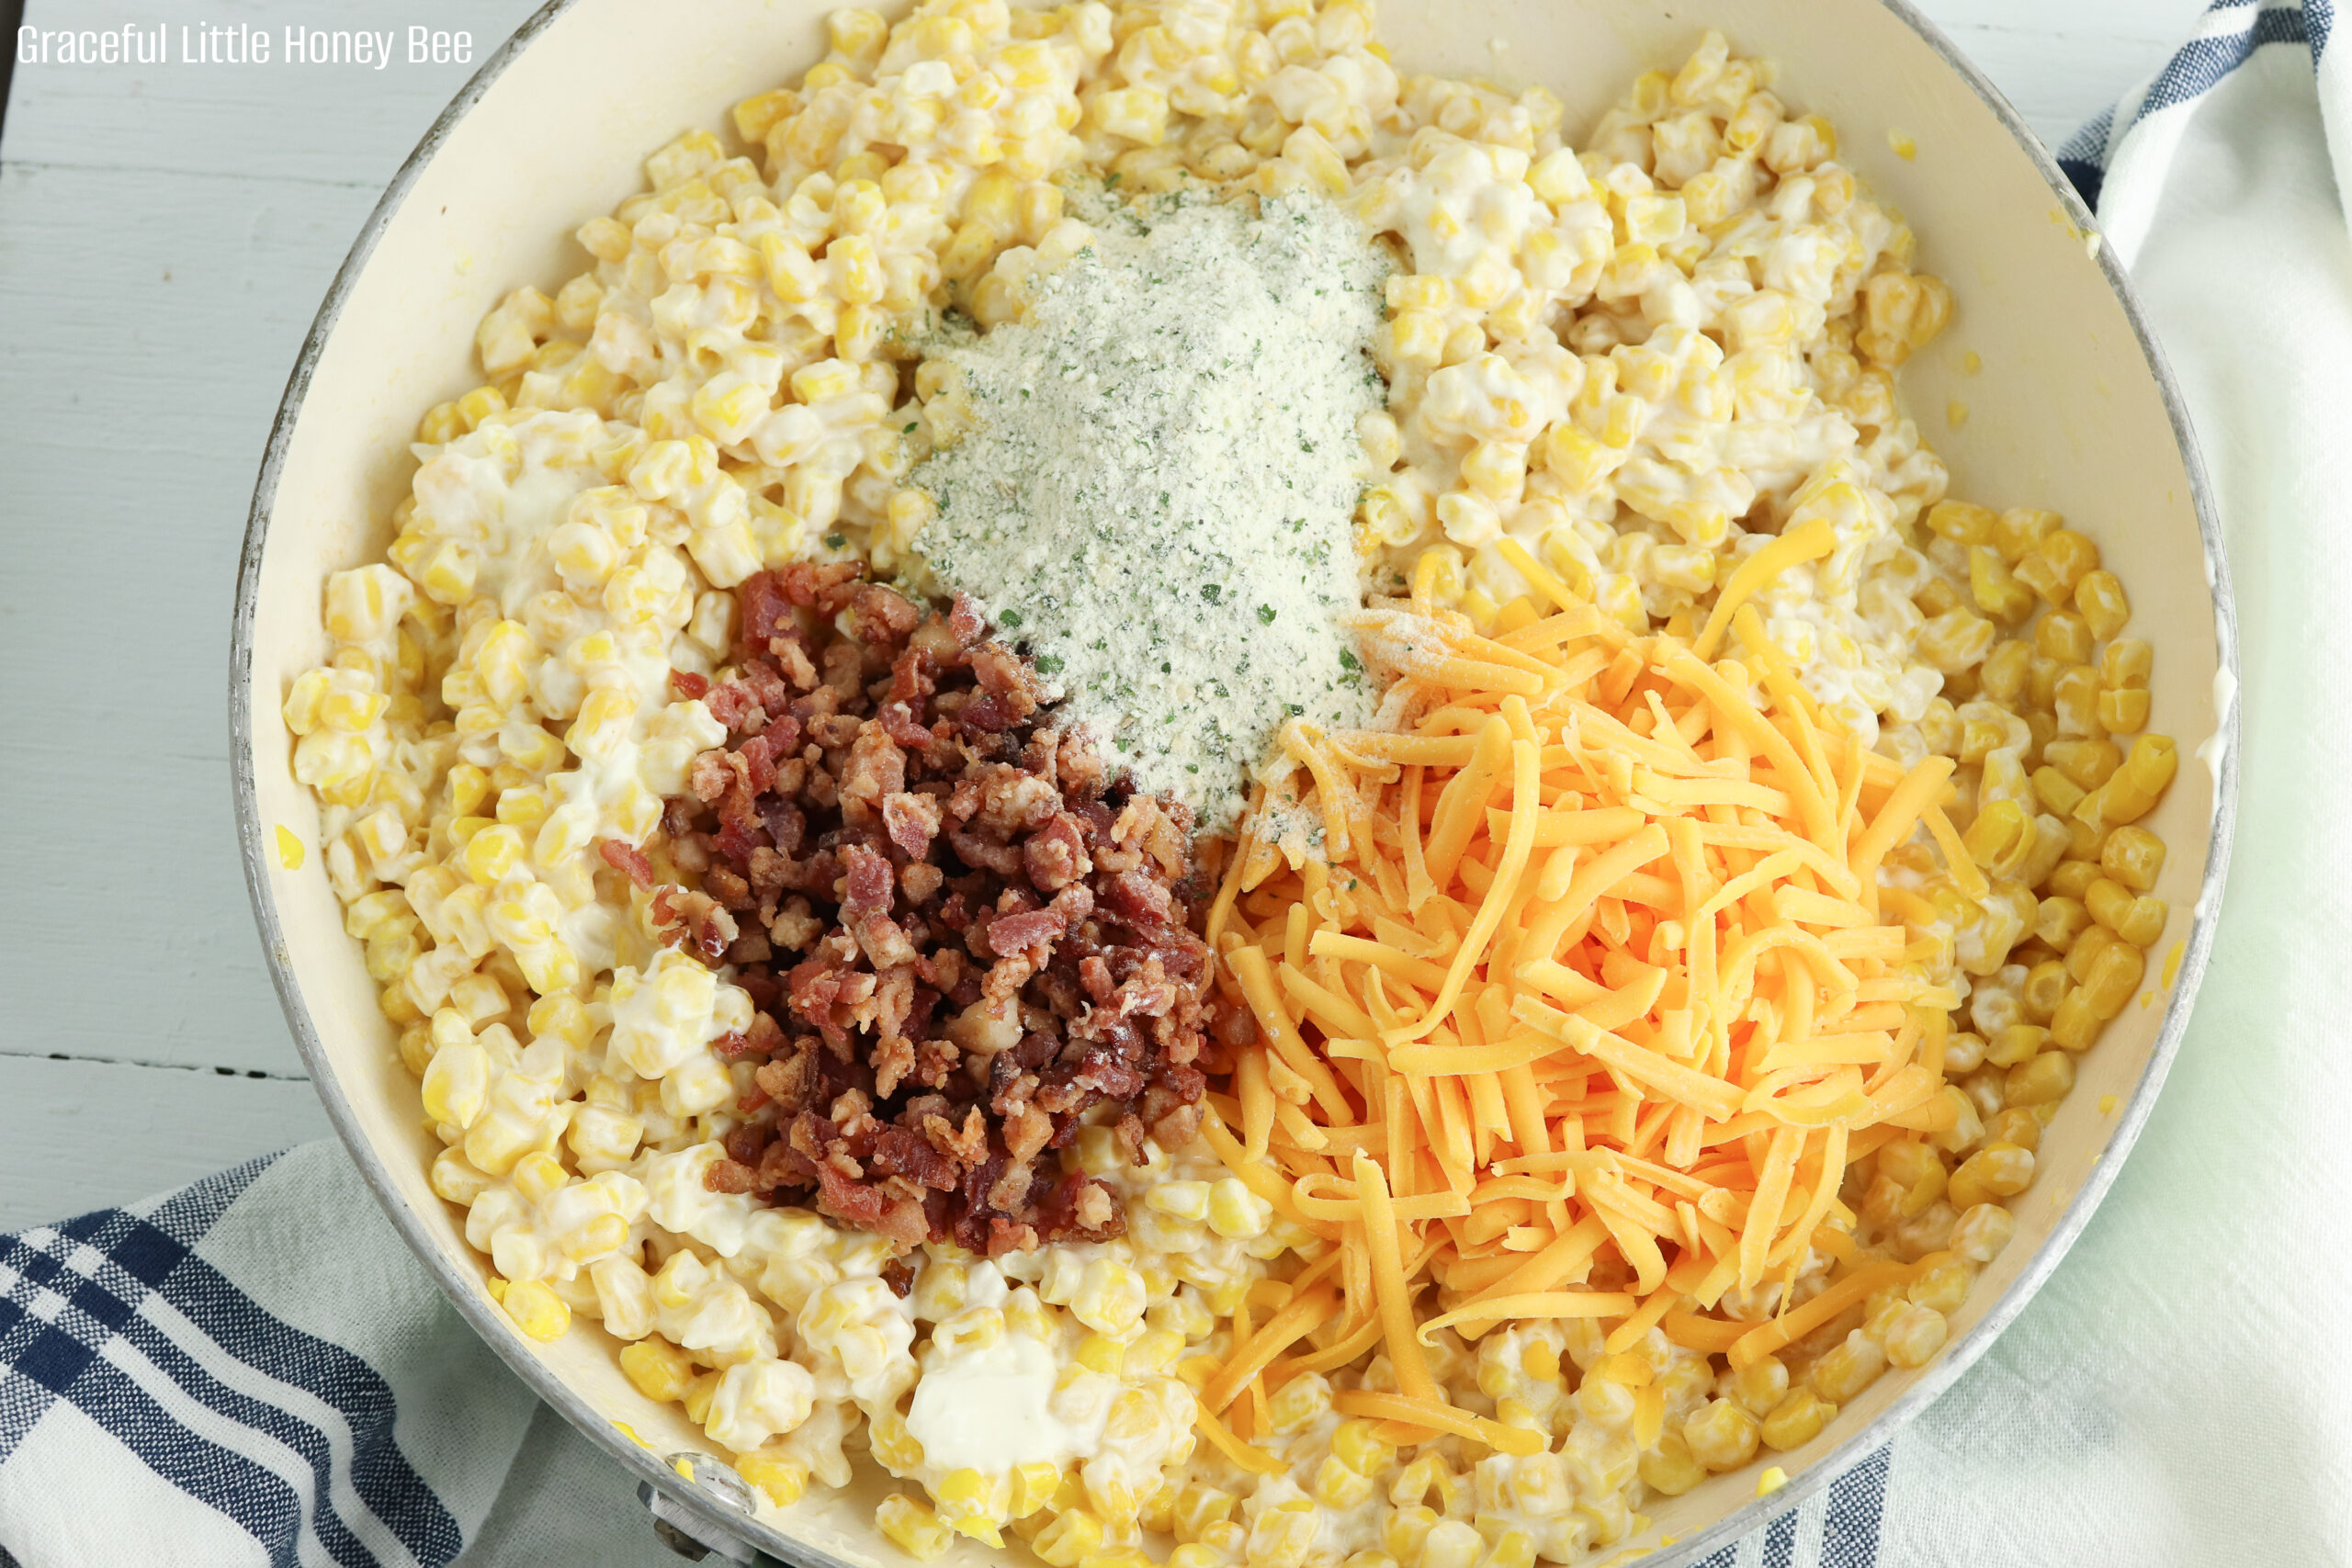 Cream cheese corn with shredded cheese, crumbled bacon and ranch seasoning on top before being stirred together.